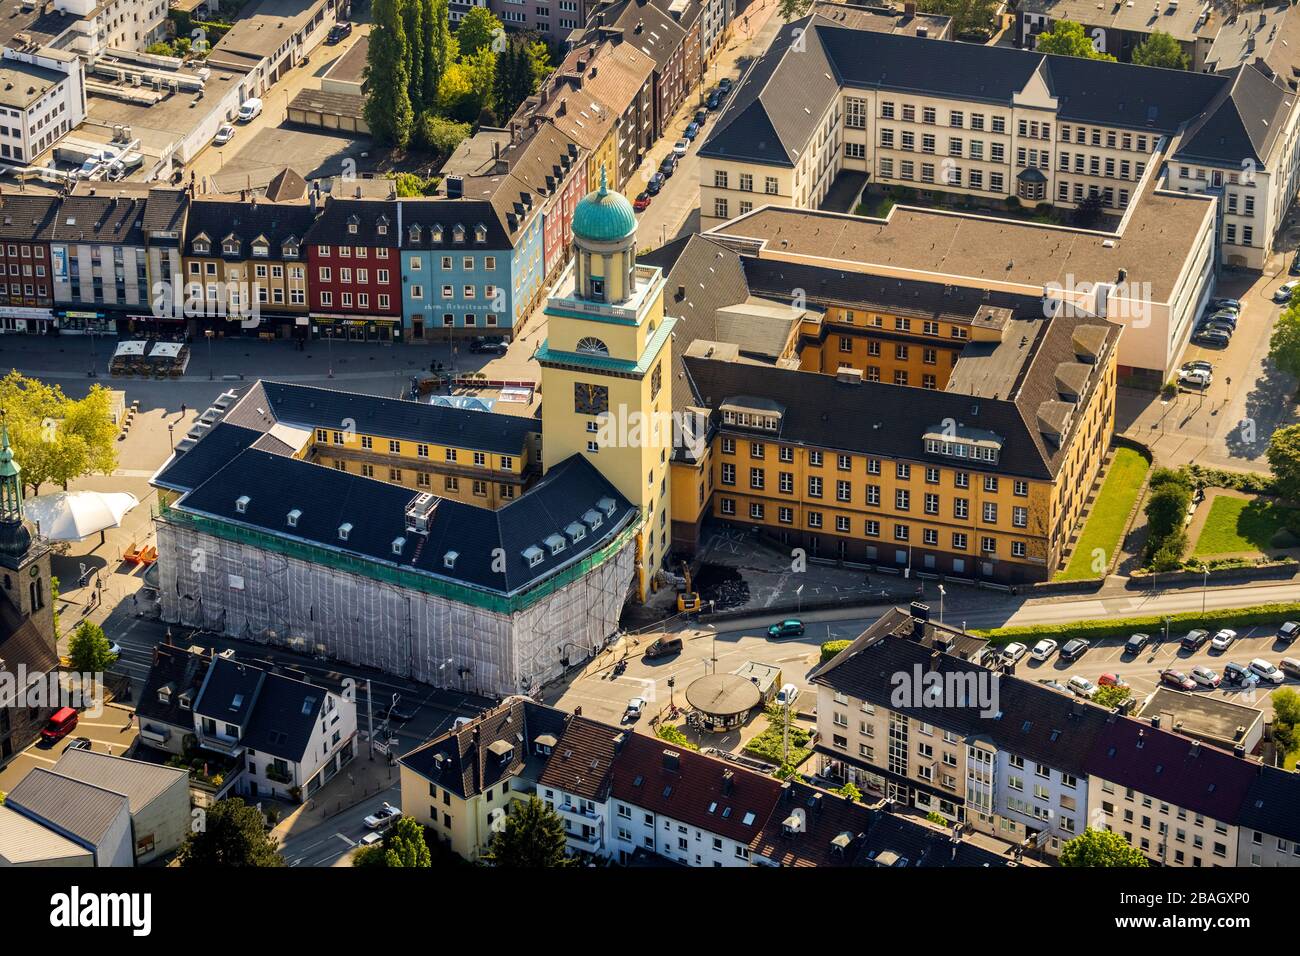 town hall of Witten and Kornmarkt, 30.04.2019, aerial view, Germany, North Rhine-Westphalia, Ruhr Area, Witten Stock Photo